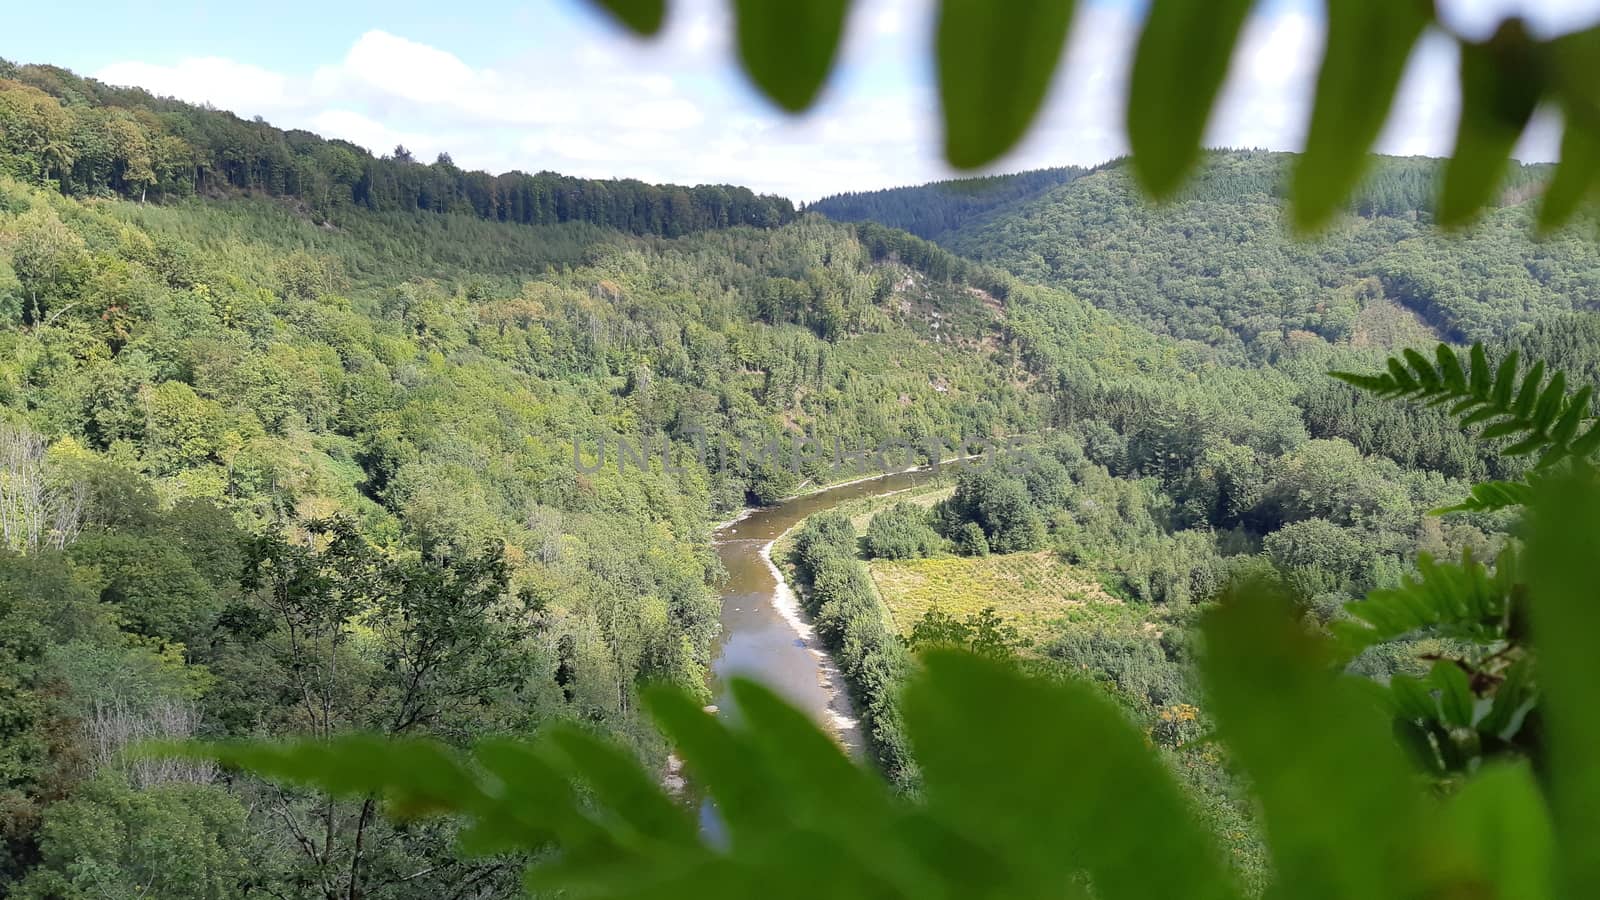 River Semois, Bouillon area, close to Rochehaut, as seen on the Les Echelles or laddertjeswandeling by kb79